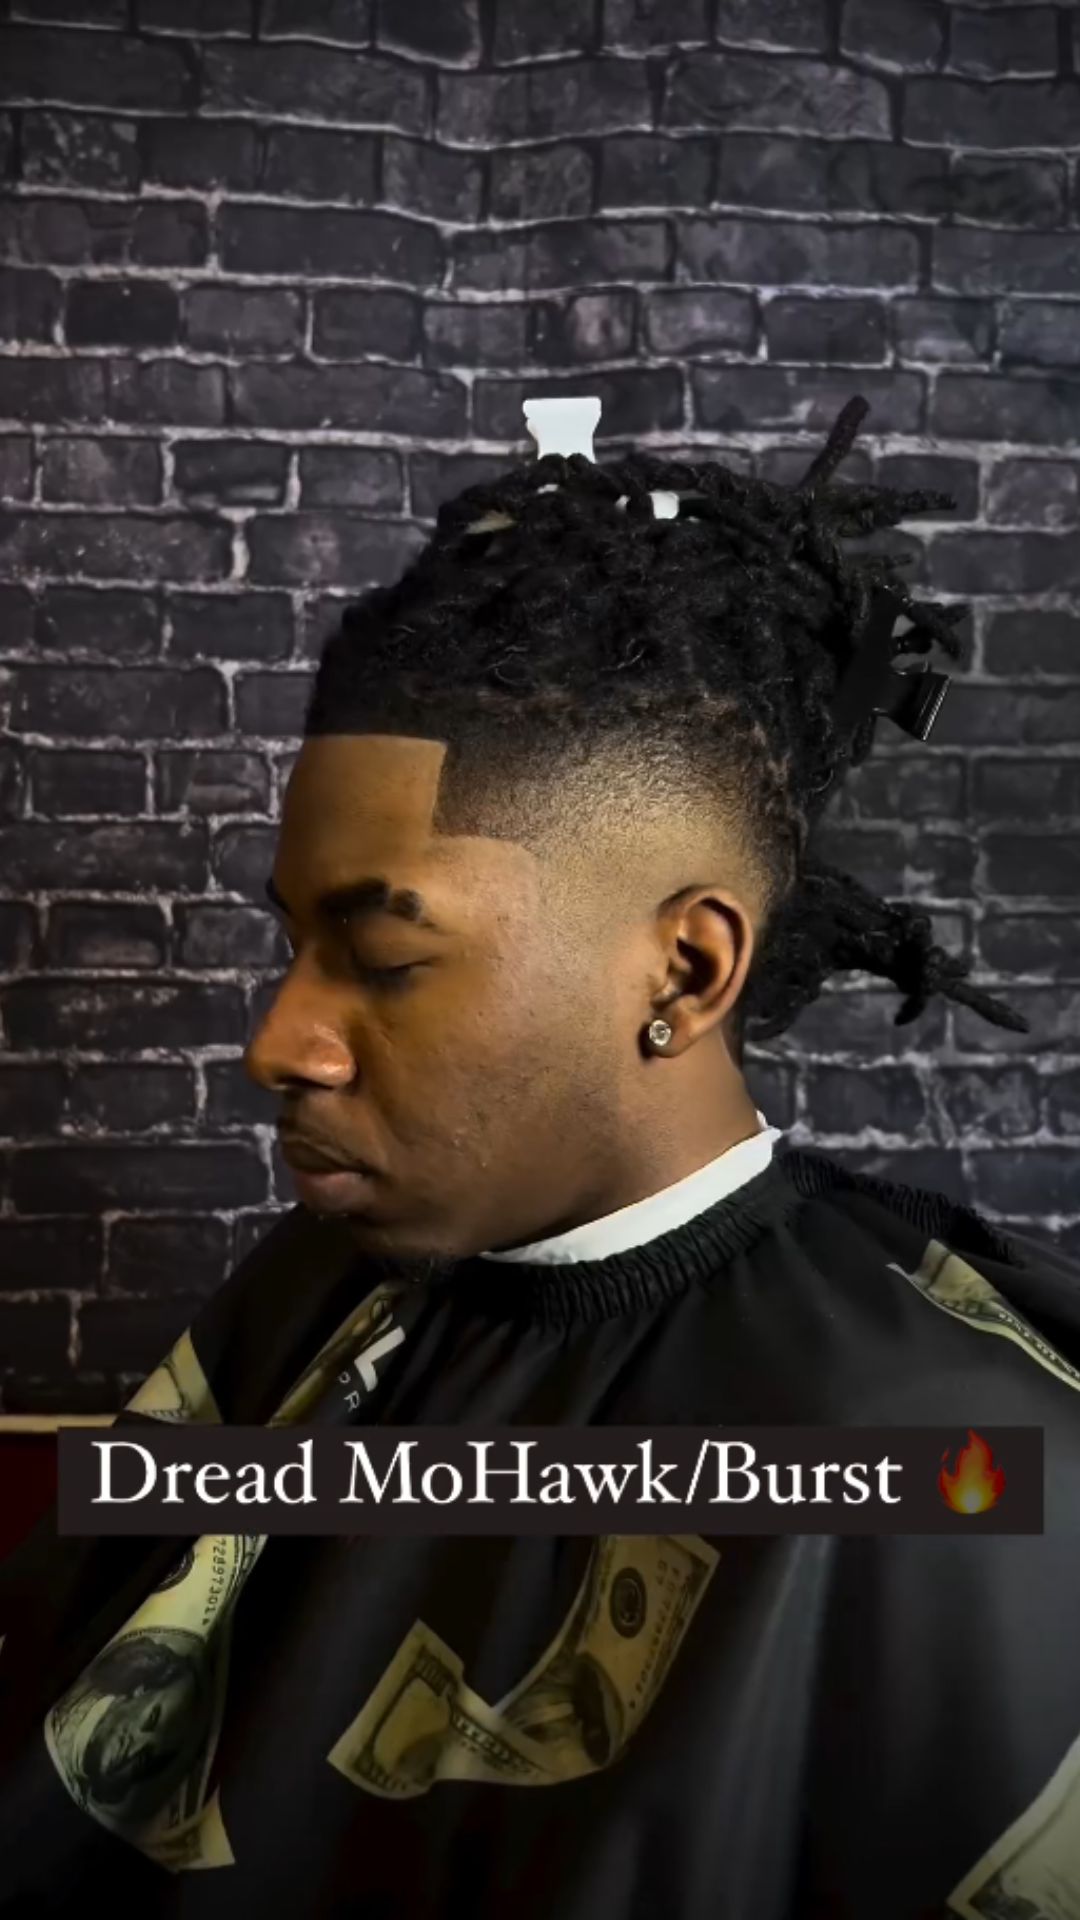 A man with burst fade dreads.